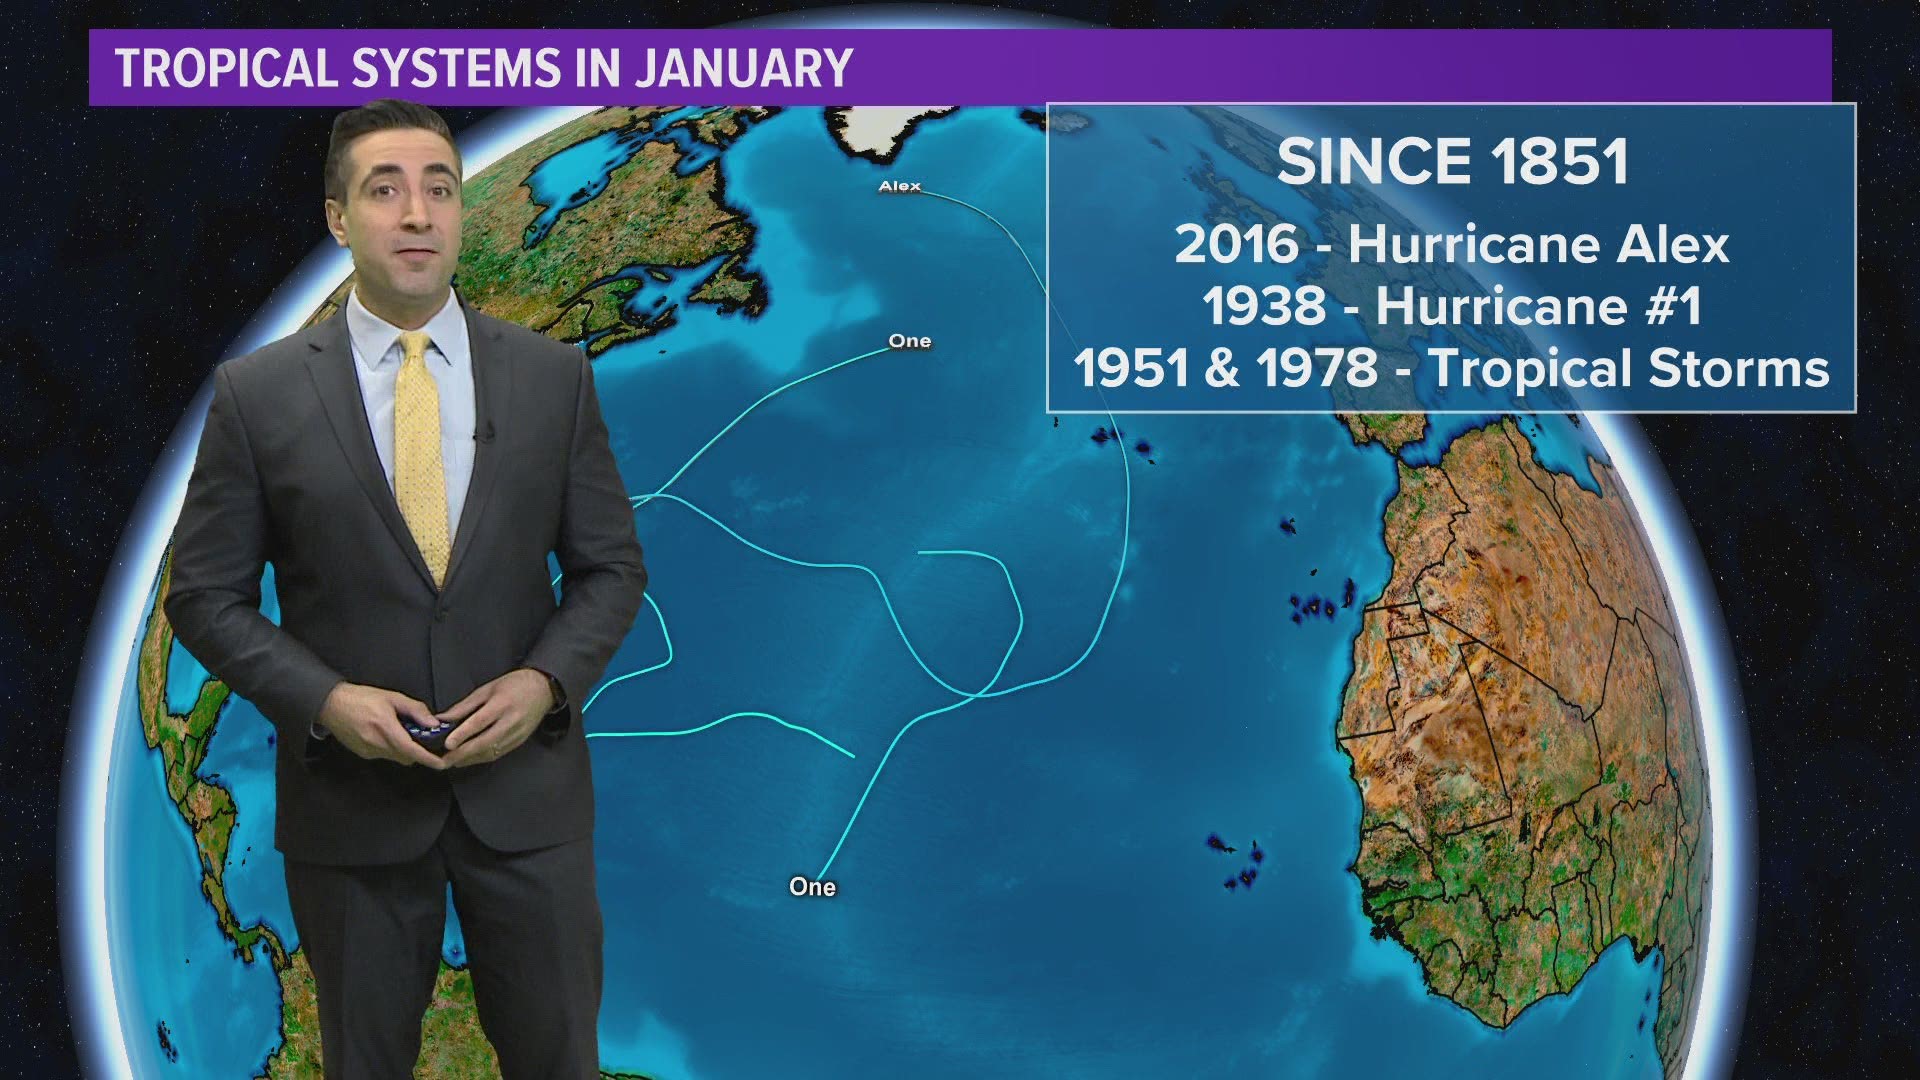 13News Now Meteorologist Tim Pandajis talks about hurricanes and other tropical storms that form outside of the typical hurricane season.